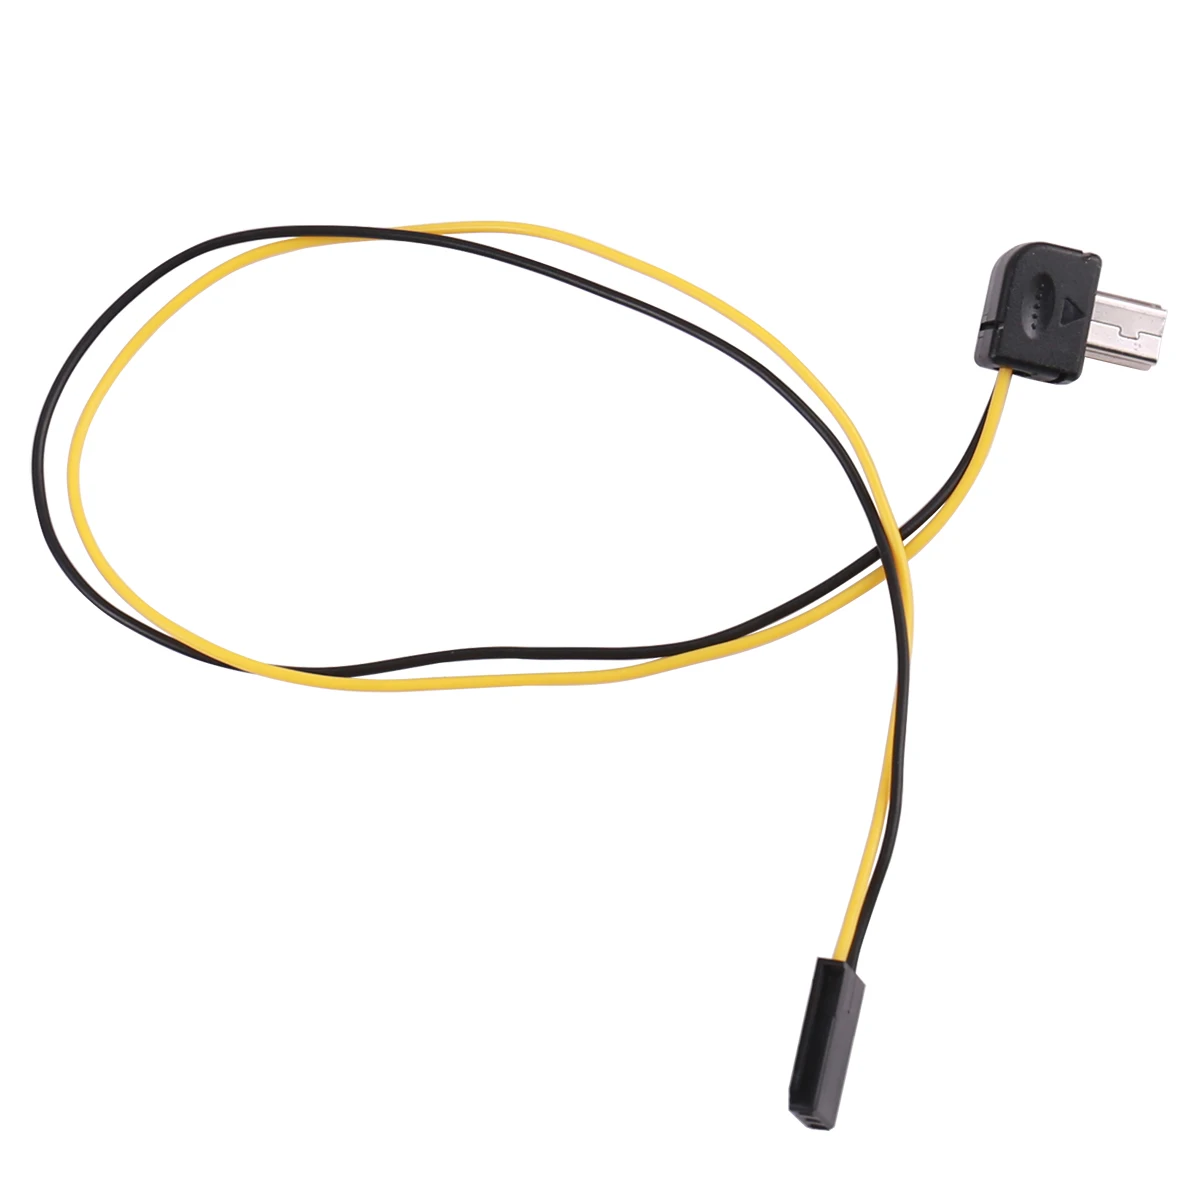 

Gopro3 Video Output Line FPV Connector Cable AV Video Real-time Output Cable For Gopro 5.8G Transmitter